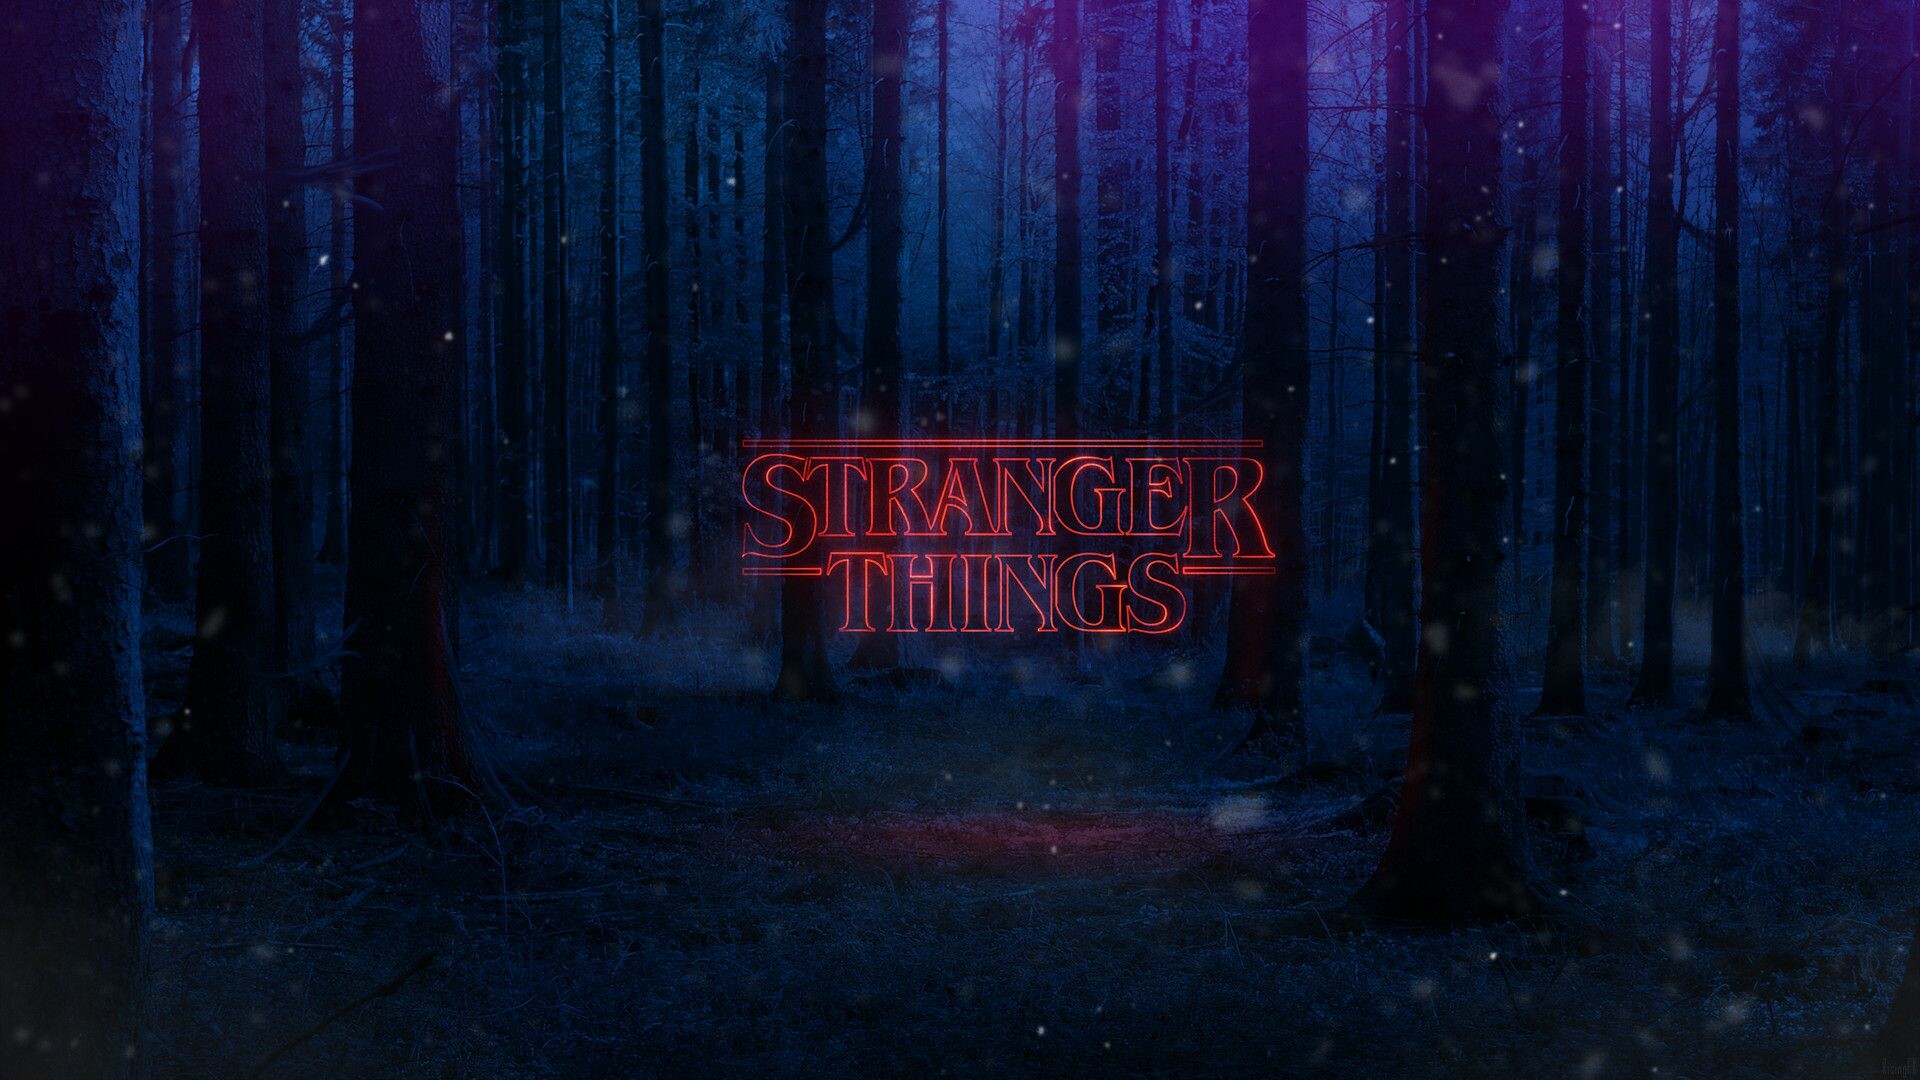 Stranger Things: Released as a Netflix original series on July 15, 2016. 1920x1080 Full HD Background.